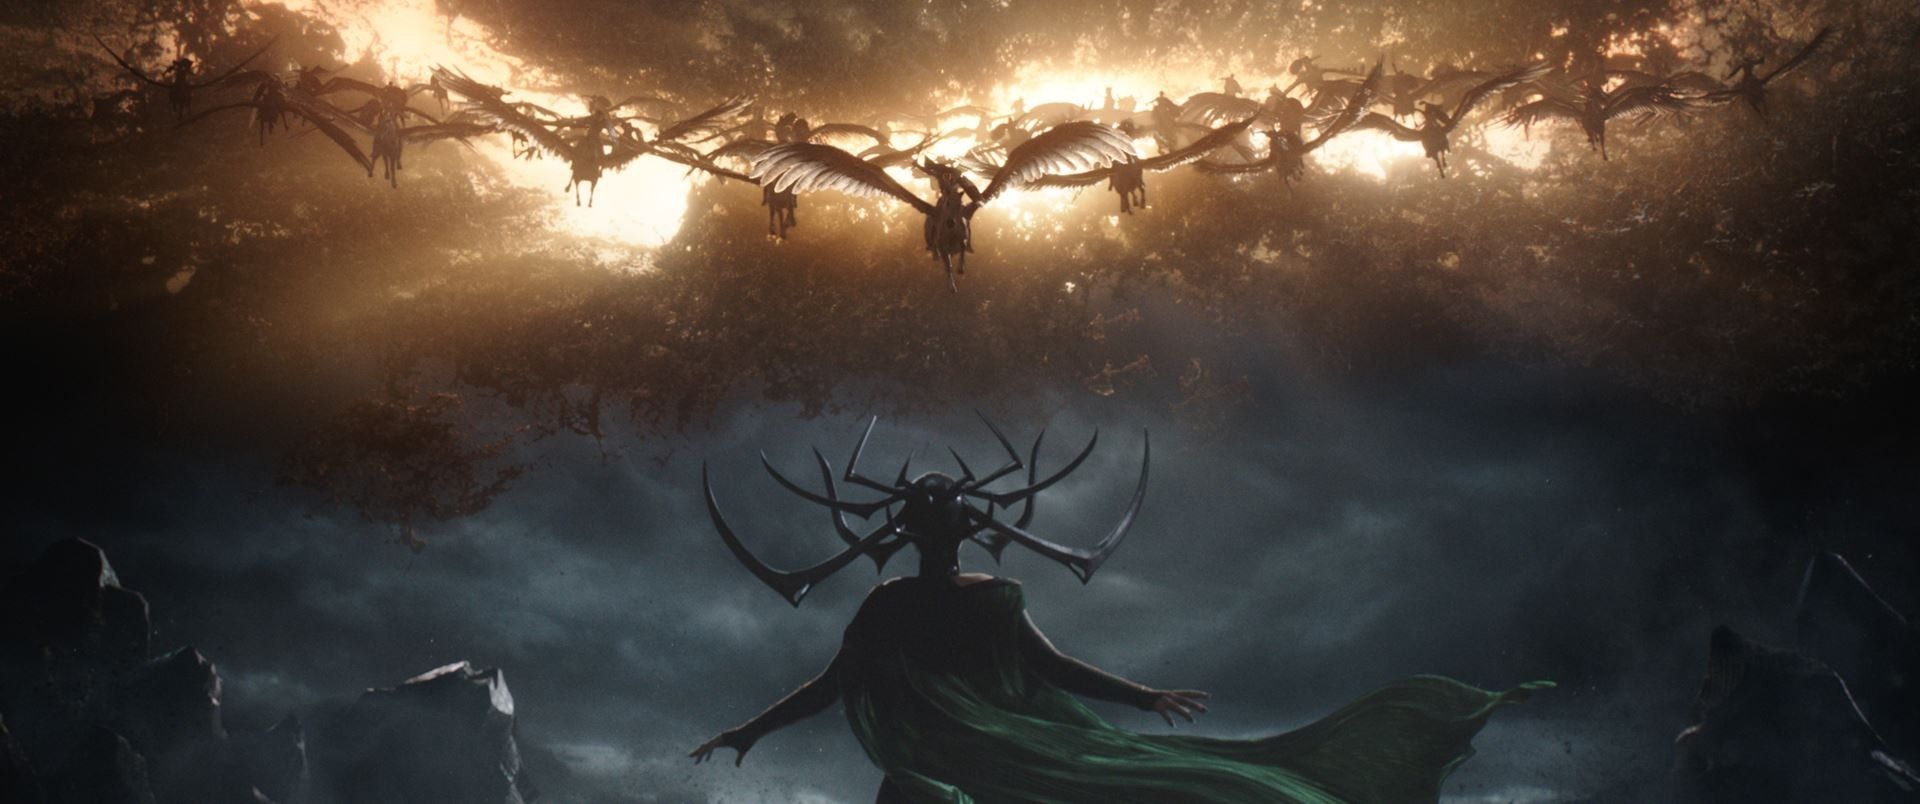 Rising Sun Picture Hammers Out Visual Effects for 'Thor: Ragnarok'. Animation World Network